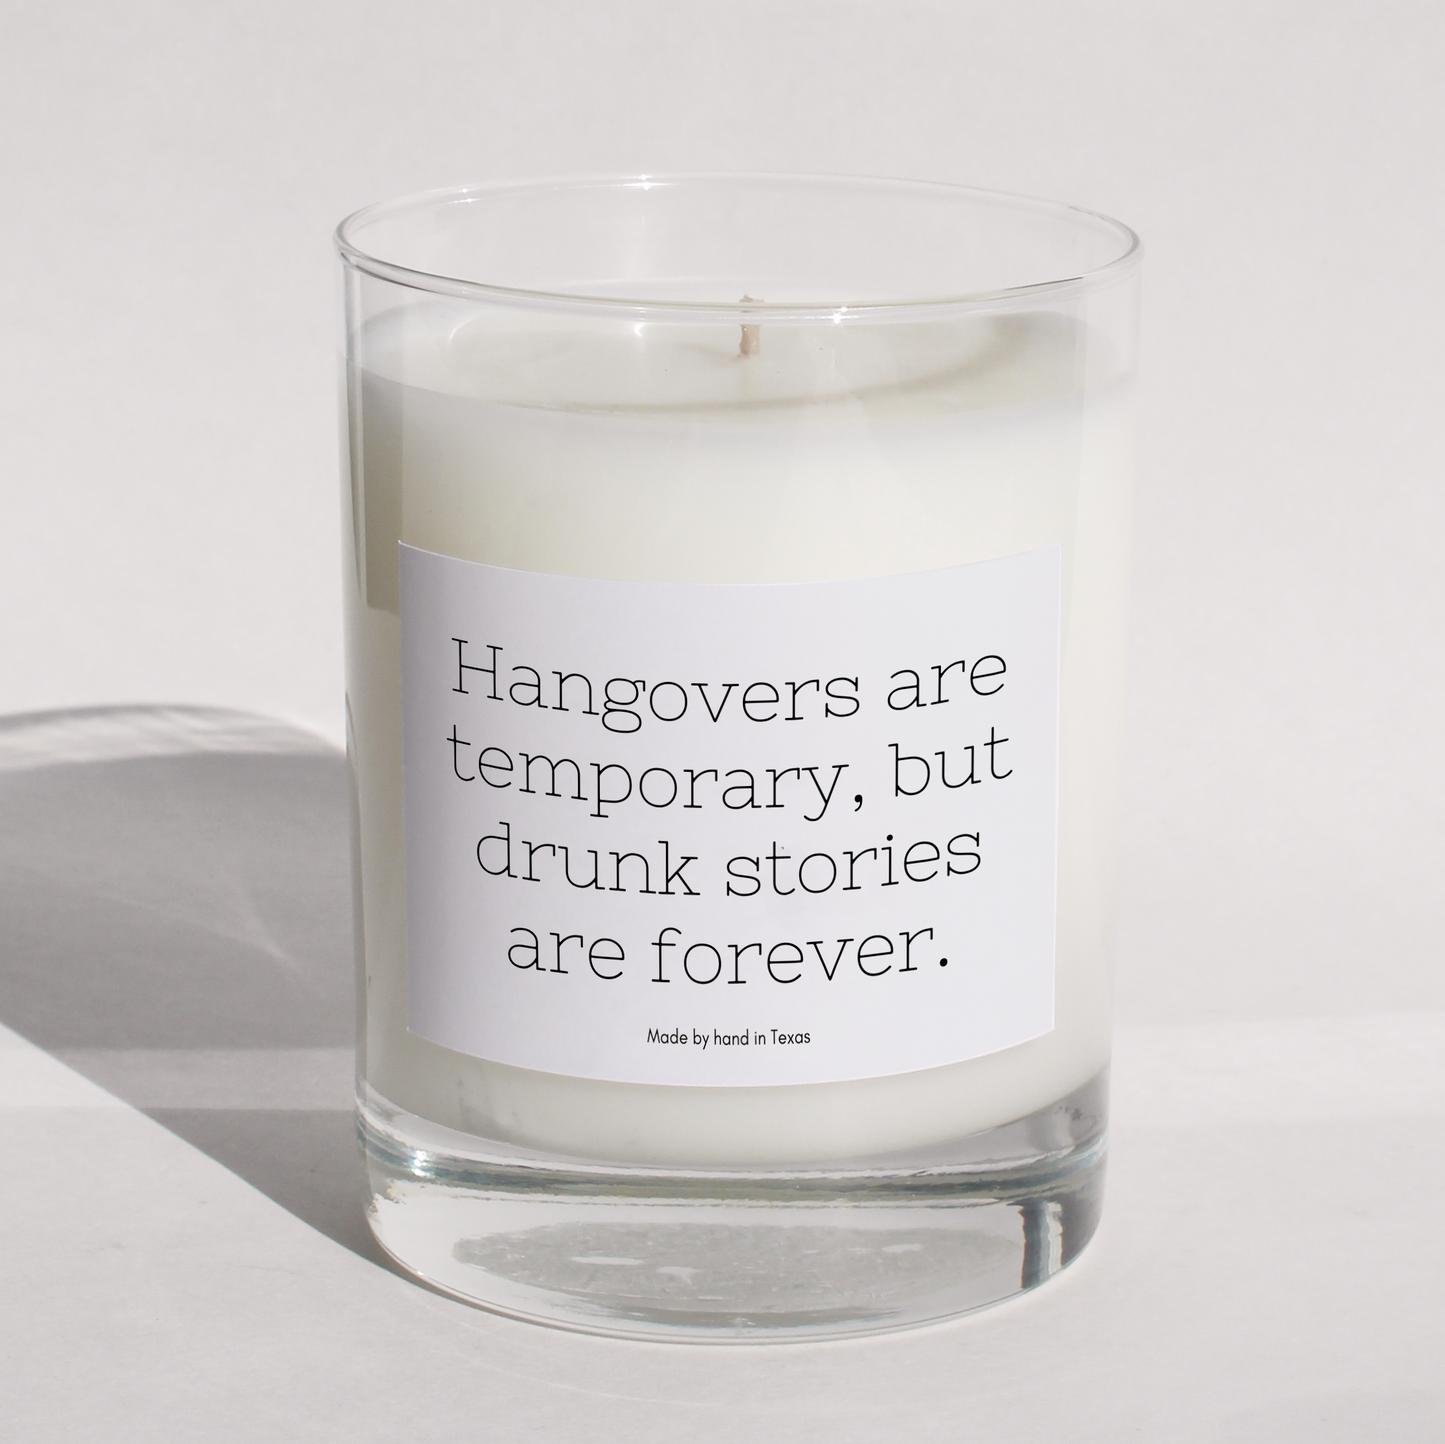 Hangovers are temporary, but drunk stories are forever.